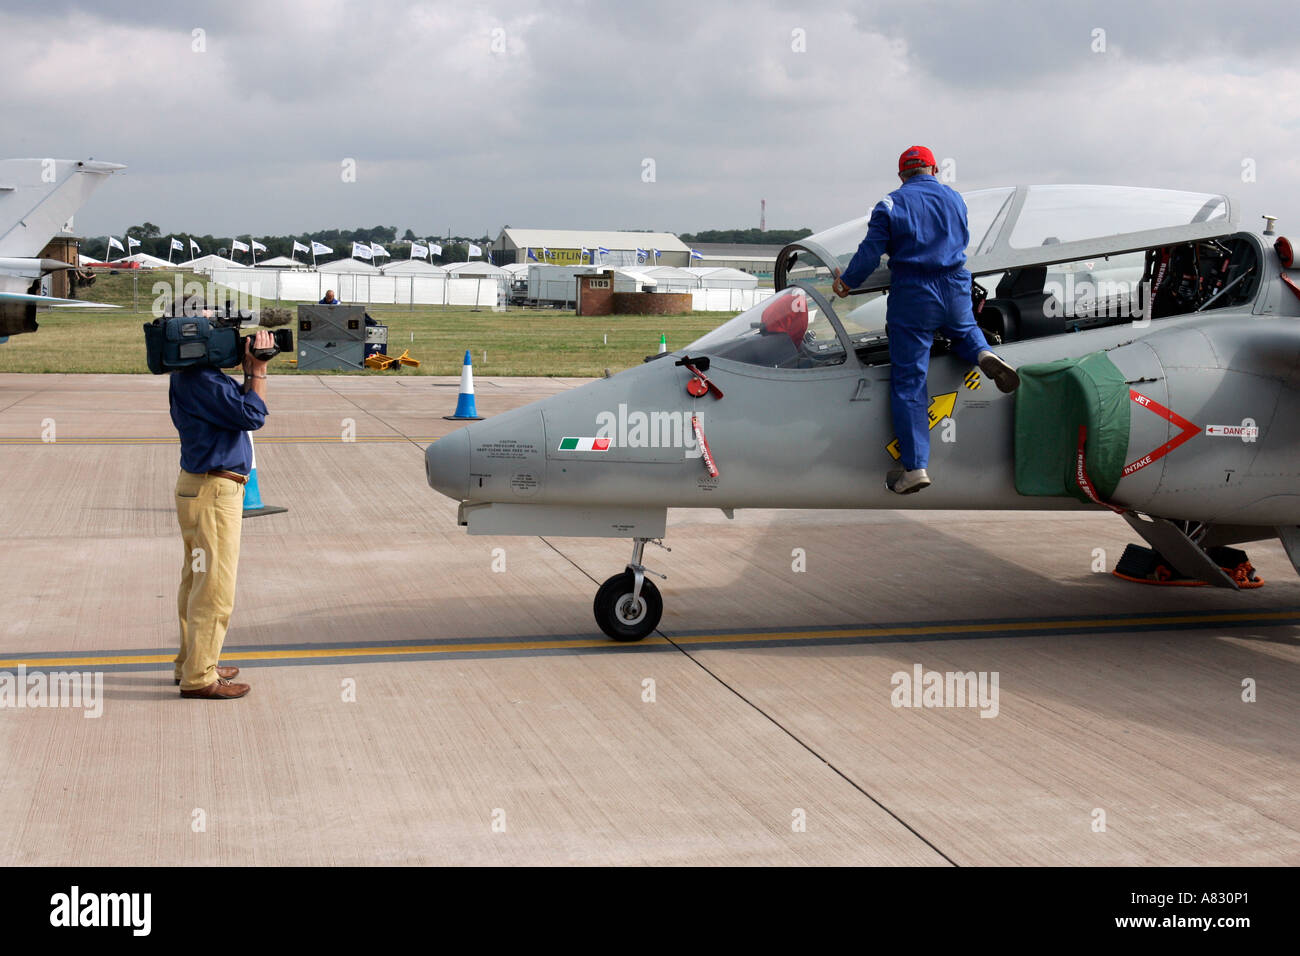 Cameraman films technician as he attends to an Italian jet fighter at airshow, both unidentifiable Stock Photo